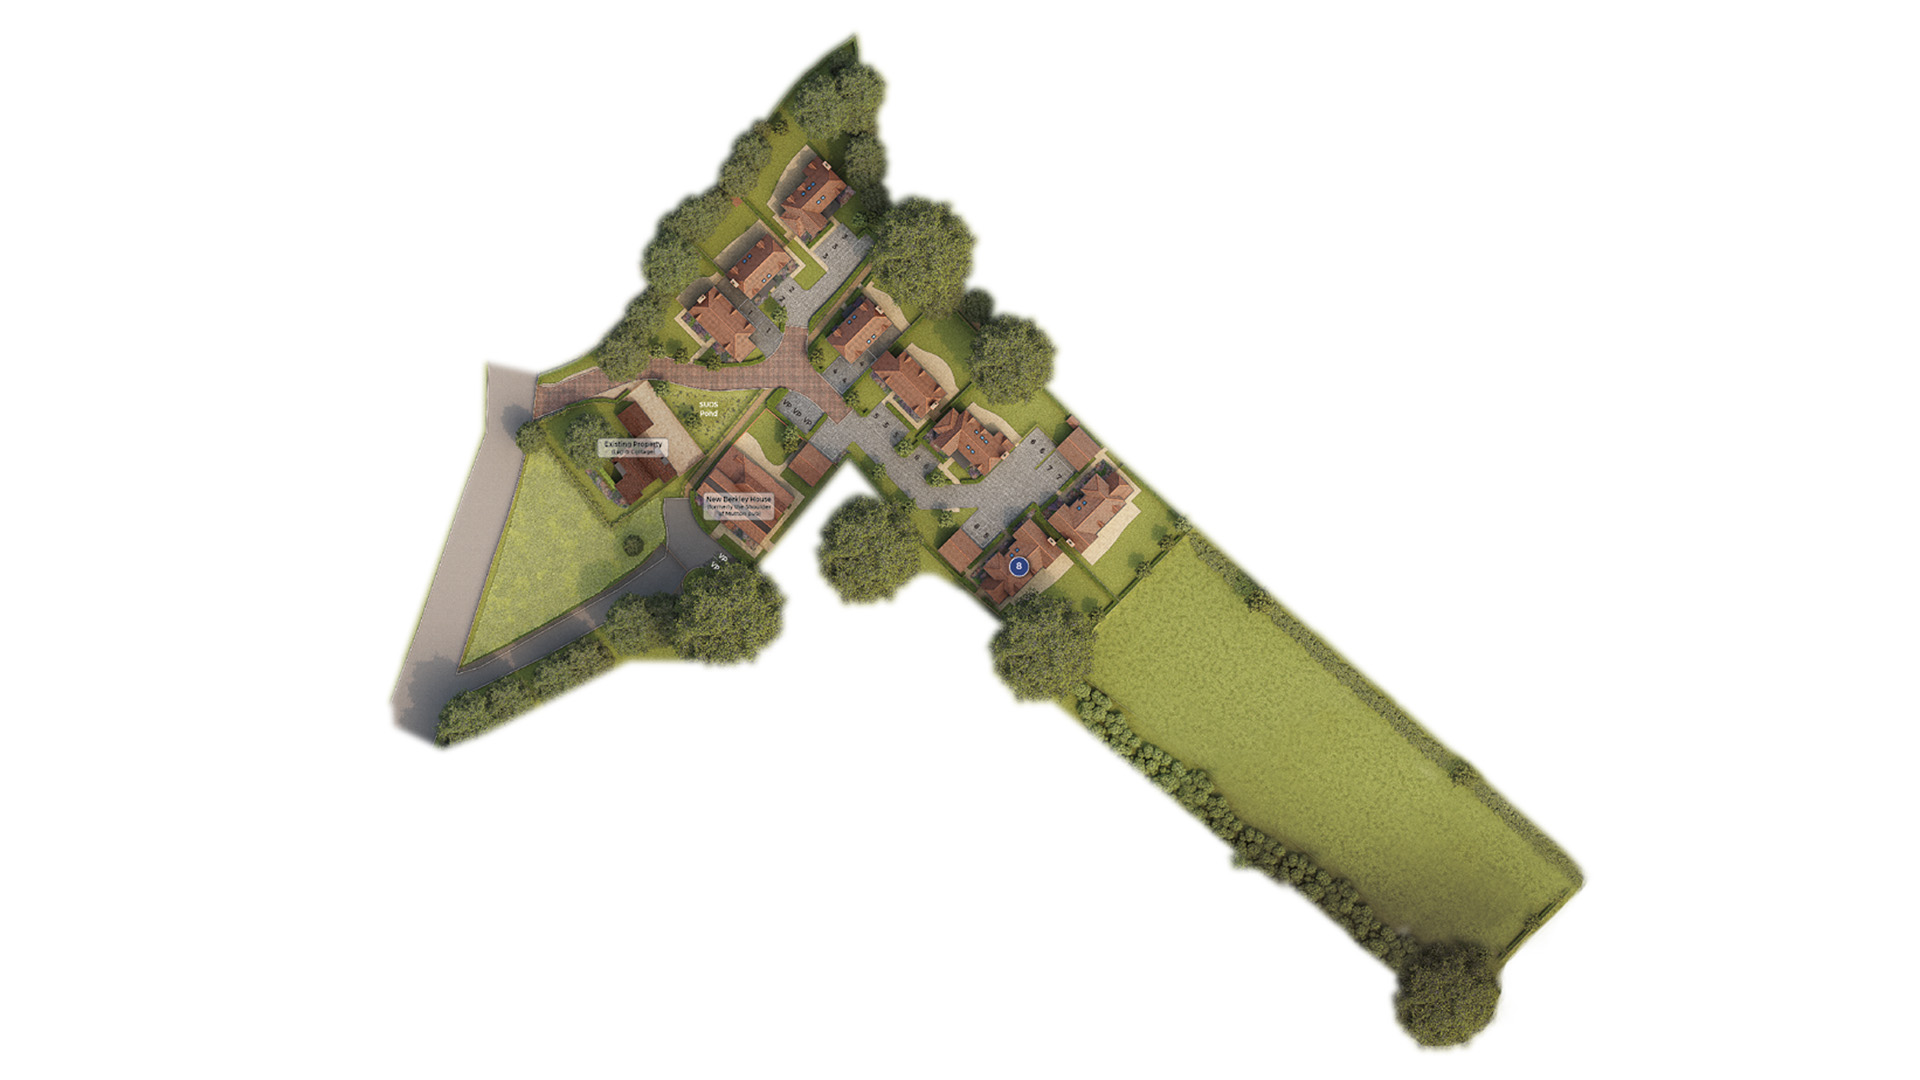 New houses in Buckinghamshire Site Map